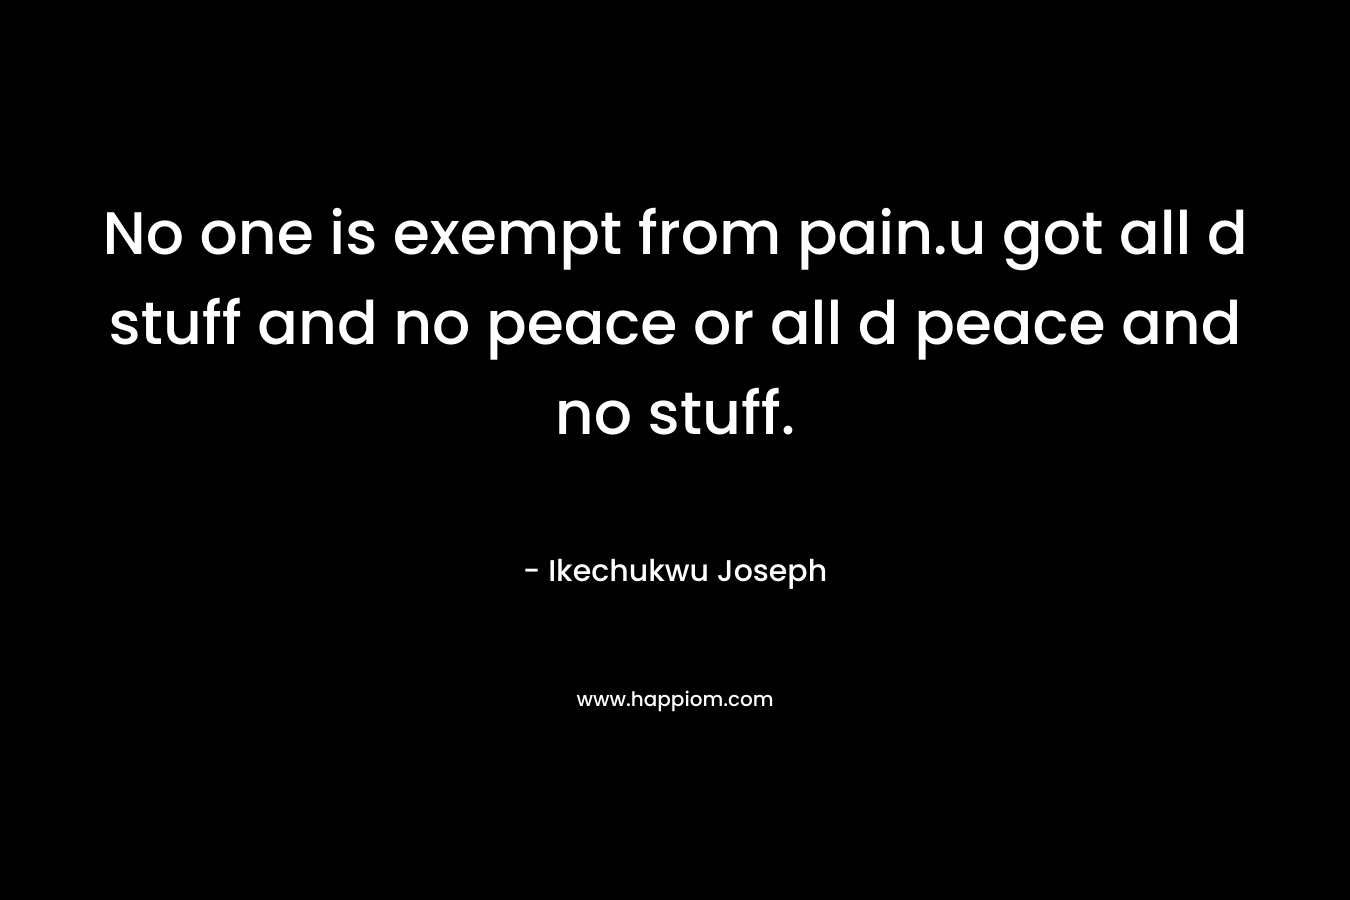 No one is exempt from pain.u got all d stuff and no peace or all d peace and no stuff. – Ikechukwu Joseph